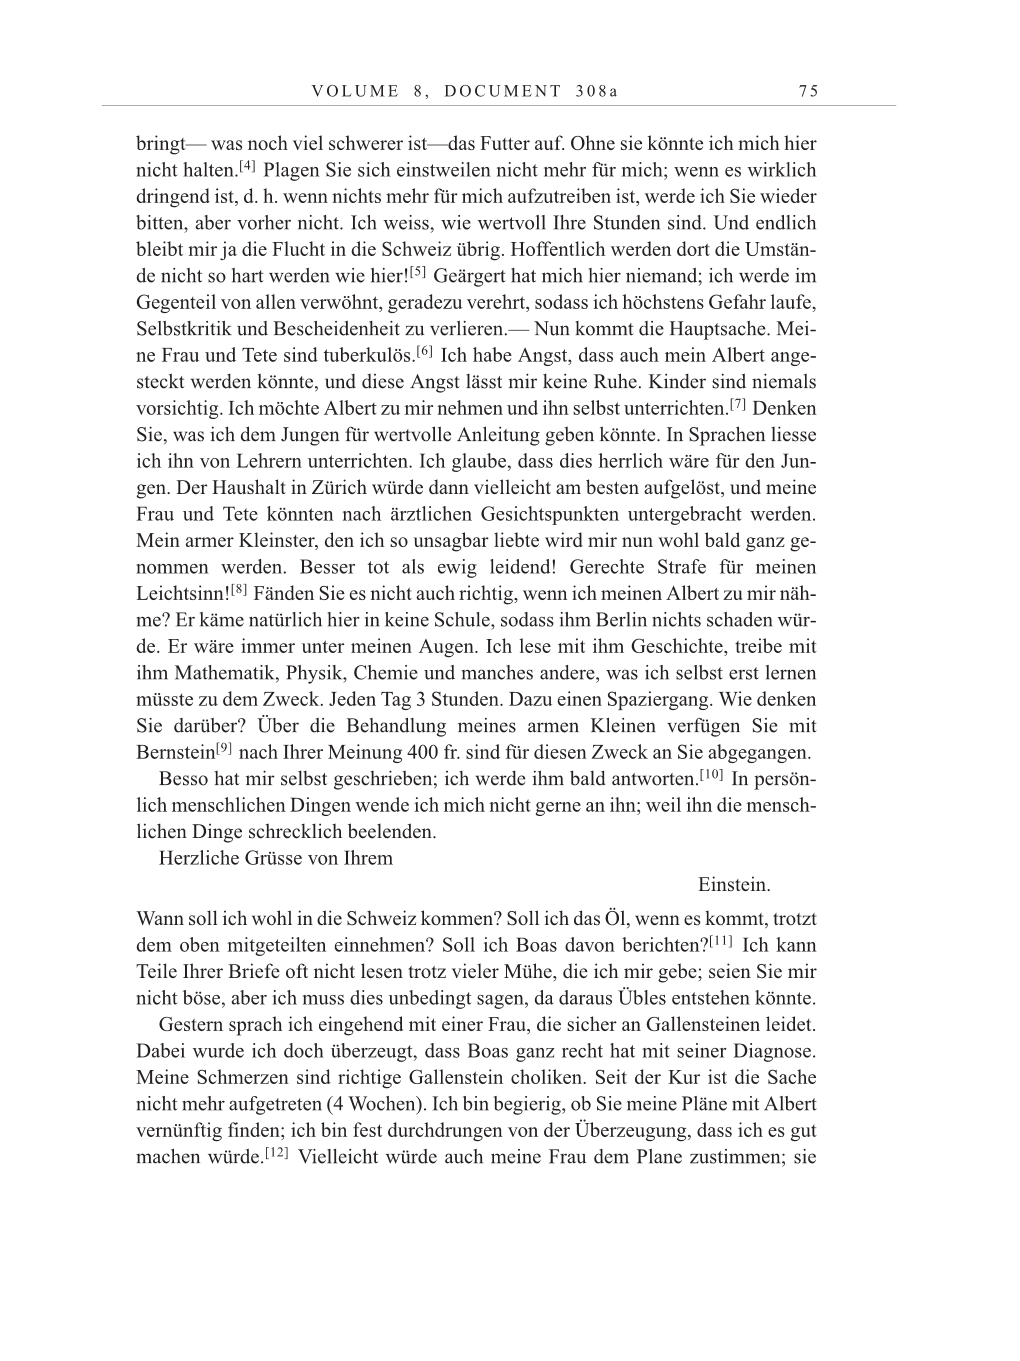 Volume 10: The Berlin Years: Correspondence May-December 1920 / Supplementary Correspondence 1909-1920 page 75